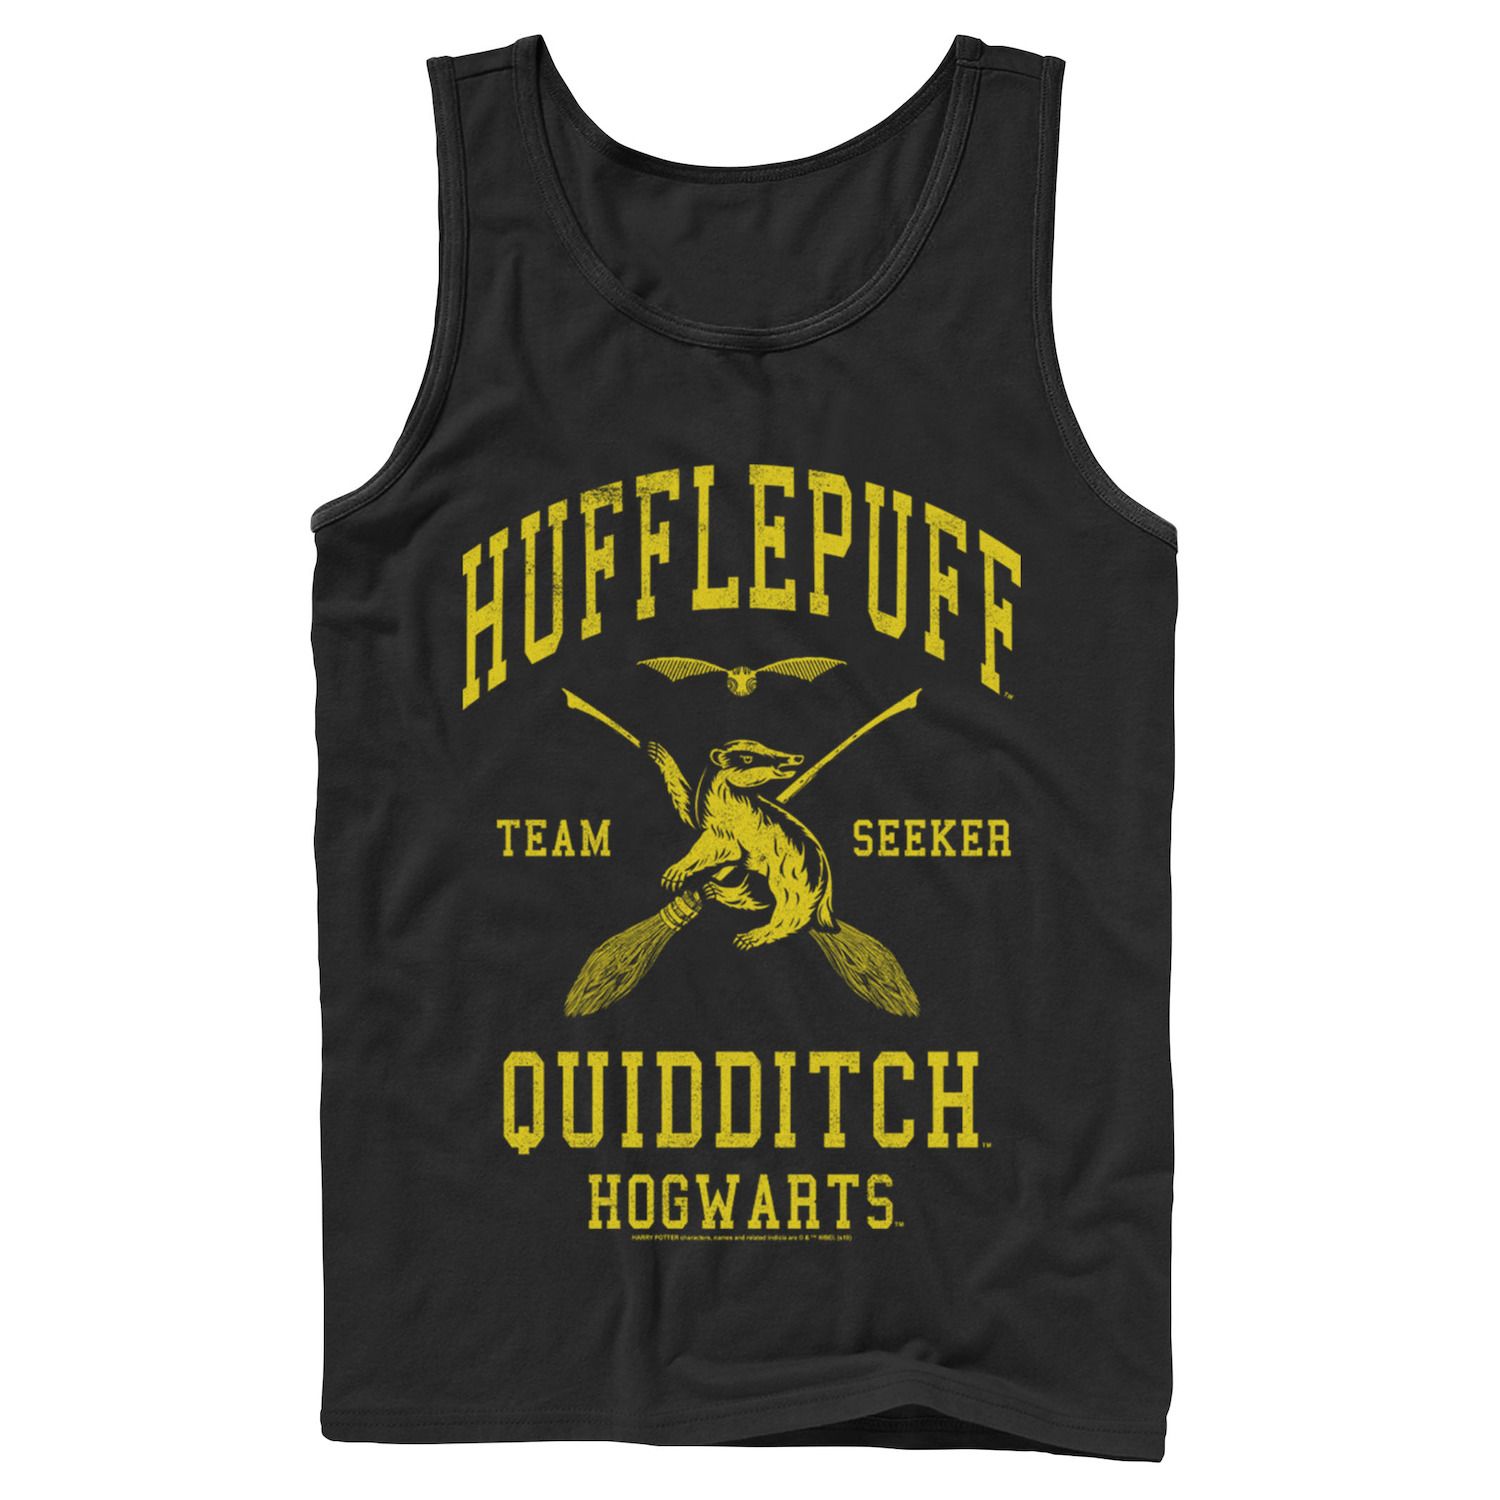 Image for Harry Potter Men's Deathly Hallows 2 Hufflepuff Quidditch Tank Top at Kohl's.